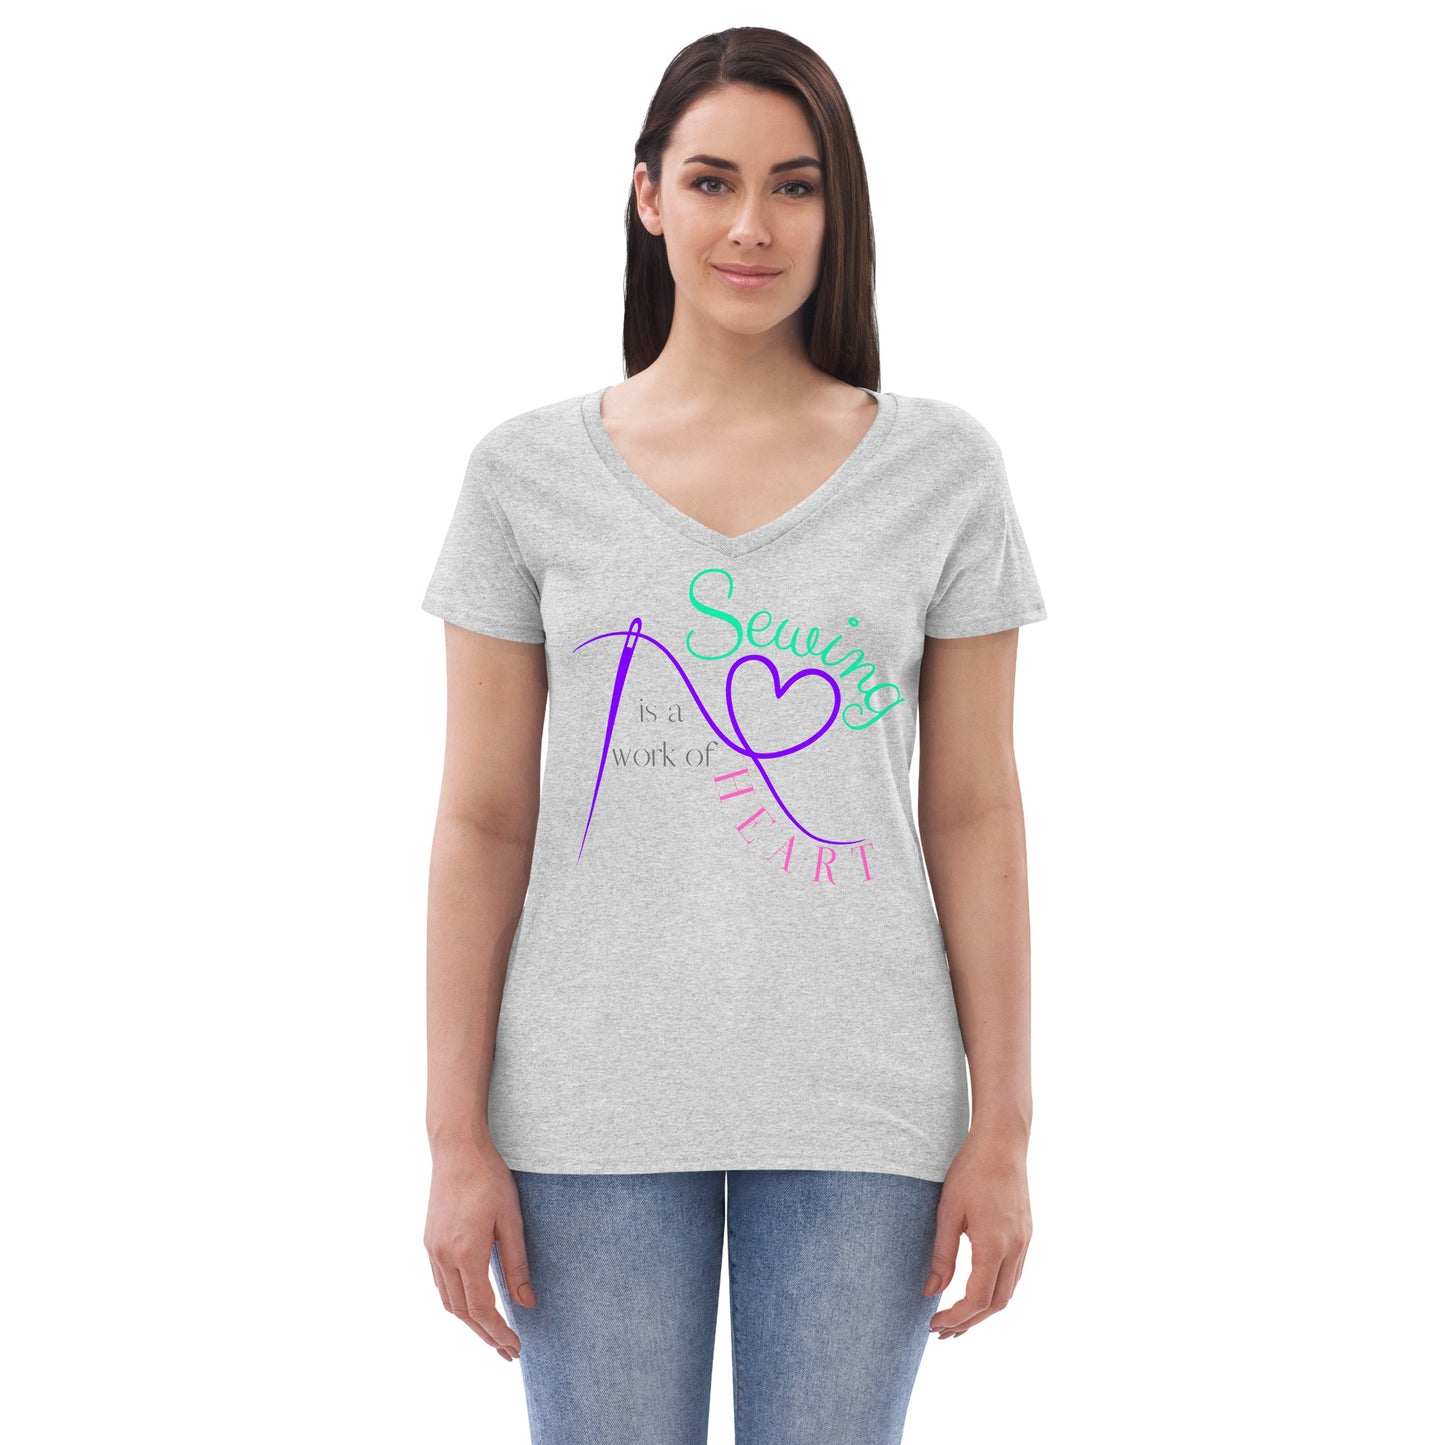 Sewing is a work of Heart Women’s recycled v-neck t-shirt